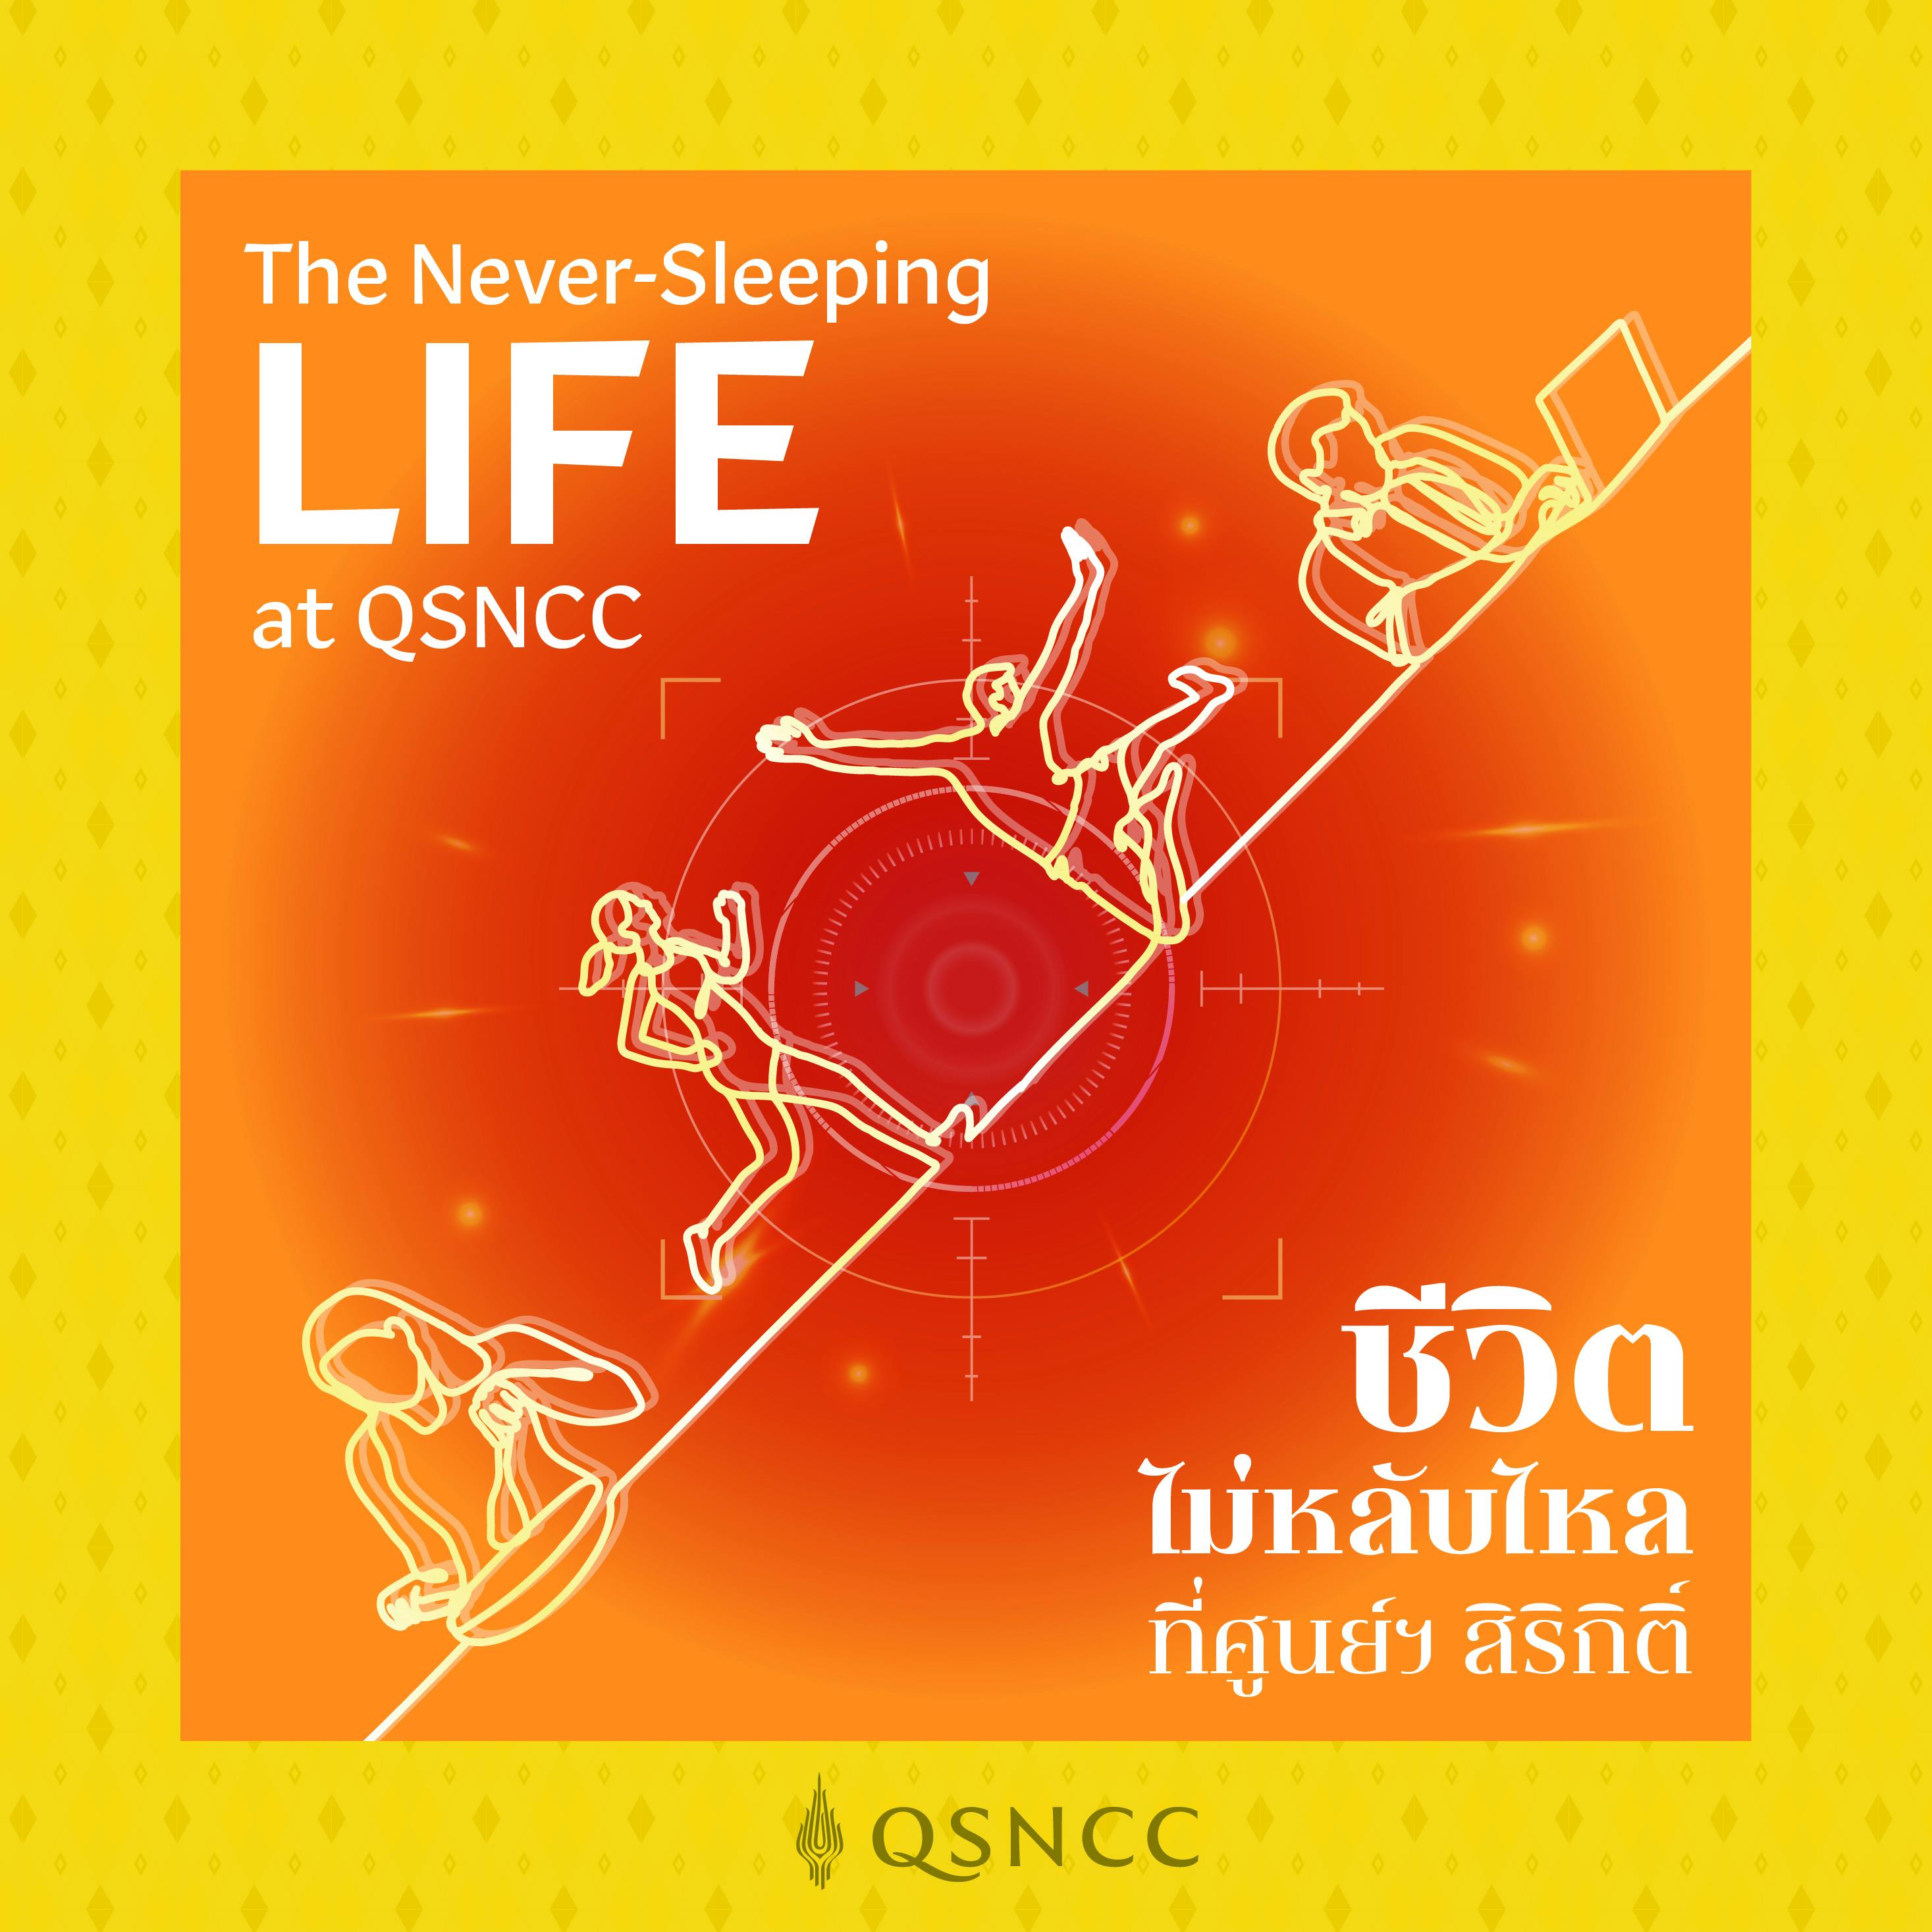 The Never-Sleeping Life at QSNCC